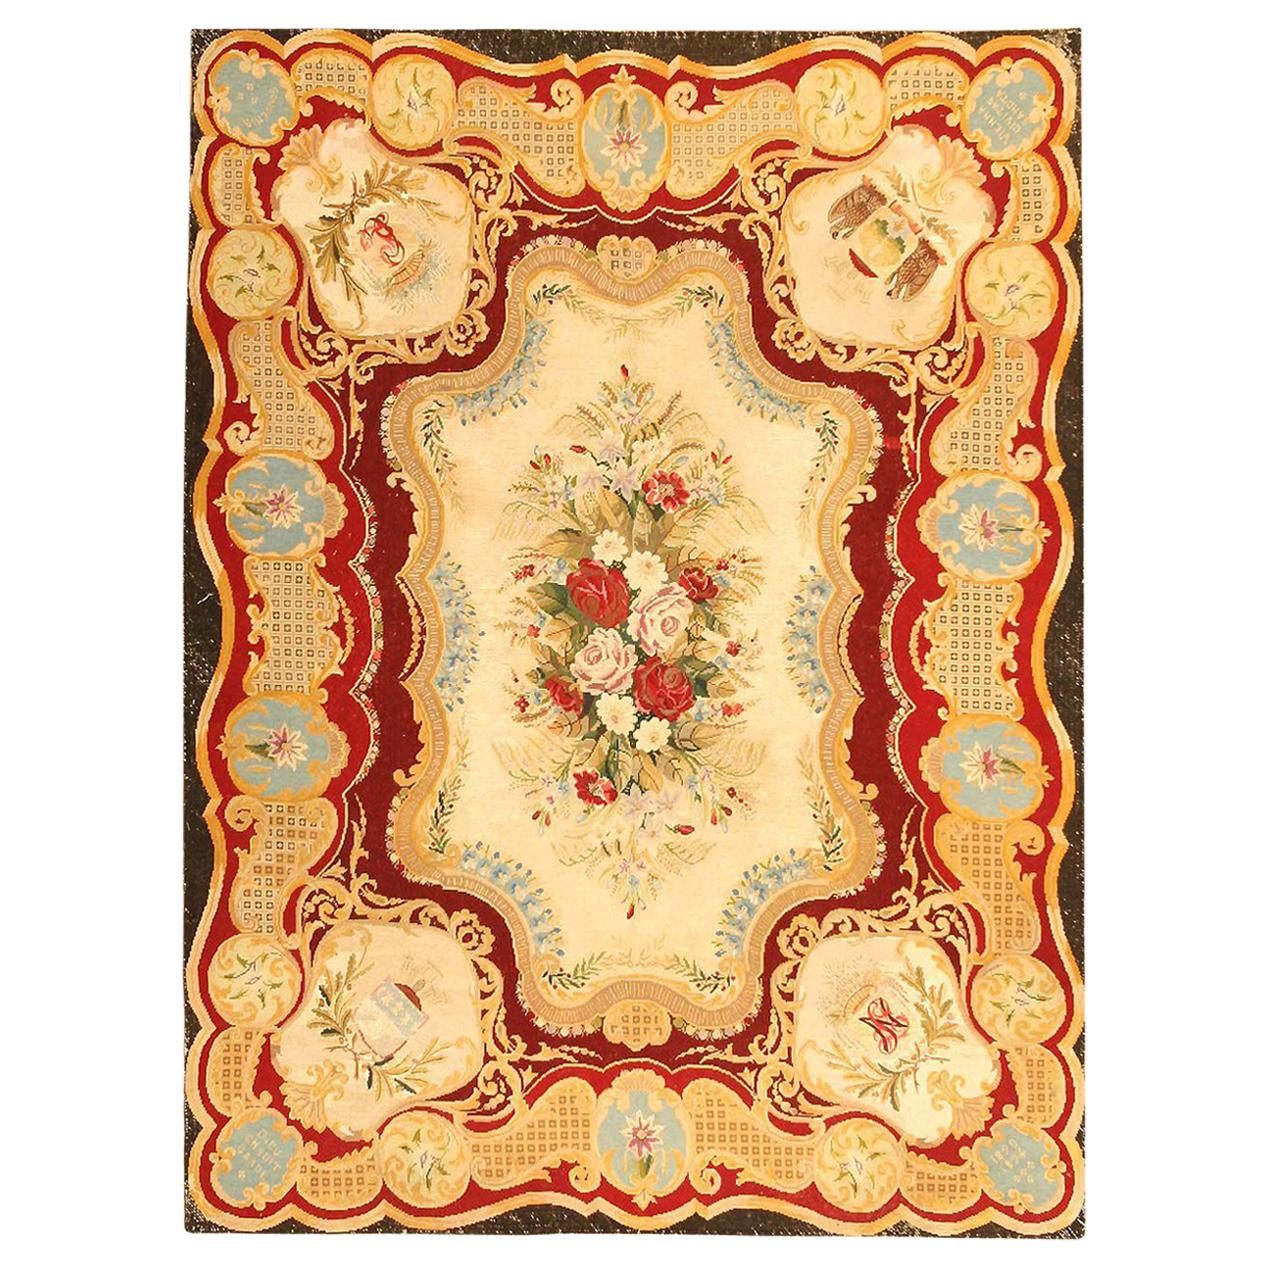 Nazmiyal Collection Antique Austro-Hungarian Needlepoint Rug. 5 ft x 6 ft 